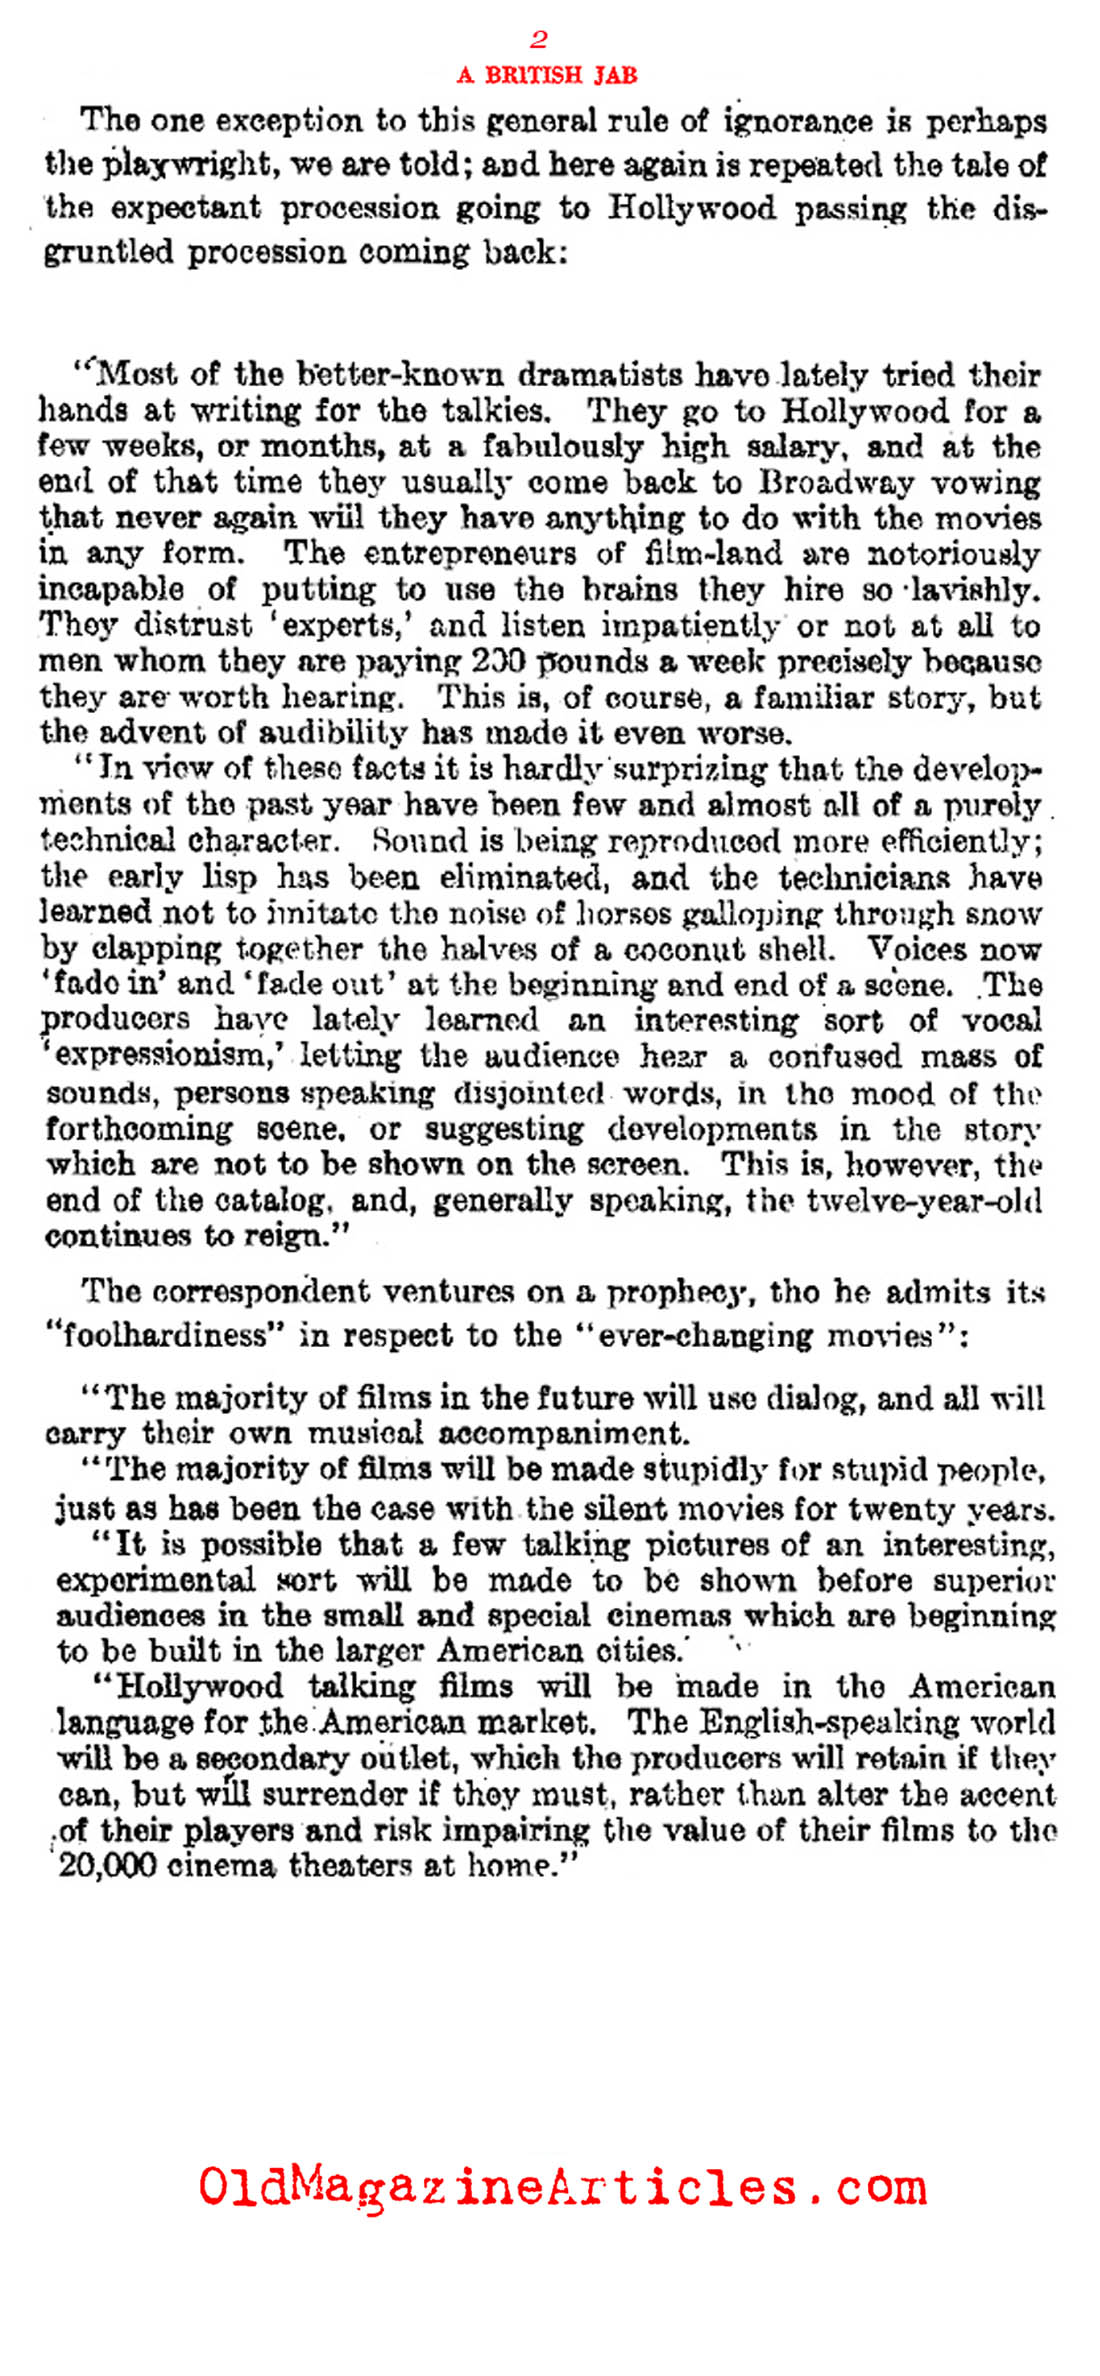 Some British Opinions About the First Talking Movies (Literary Digest, 1929)